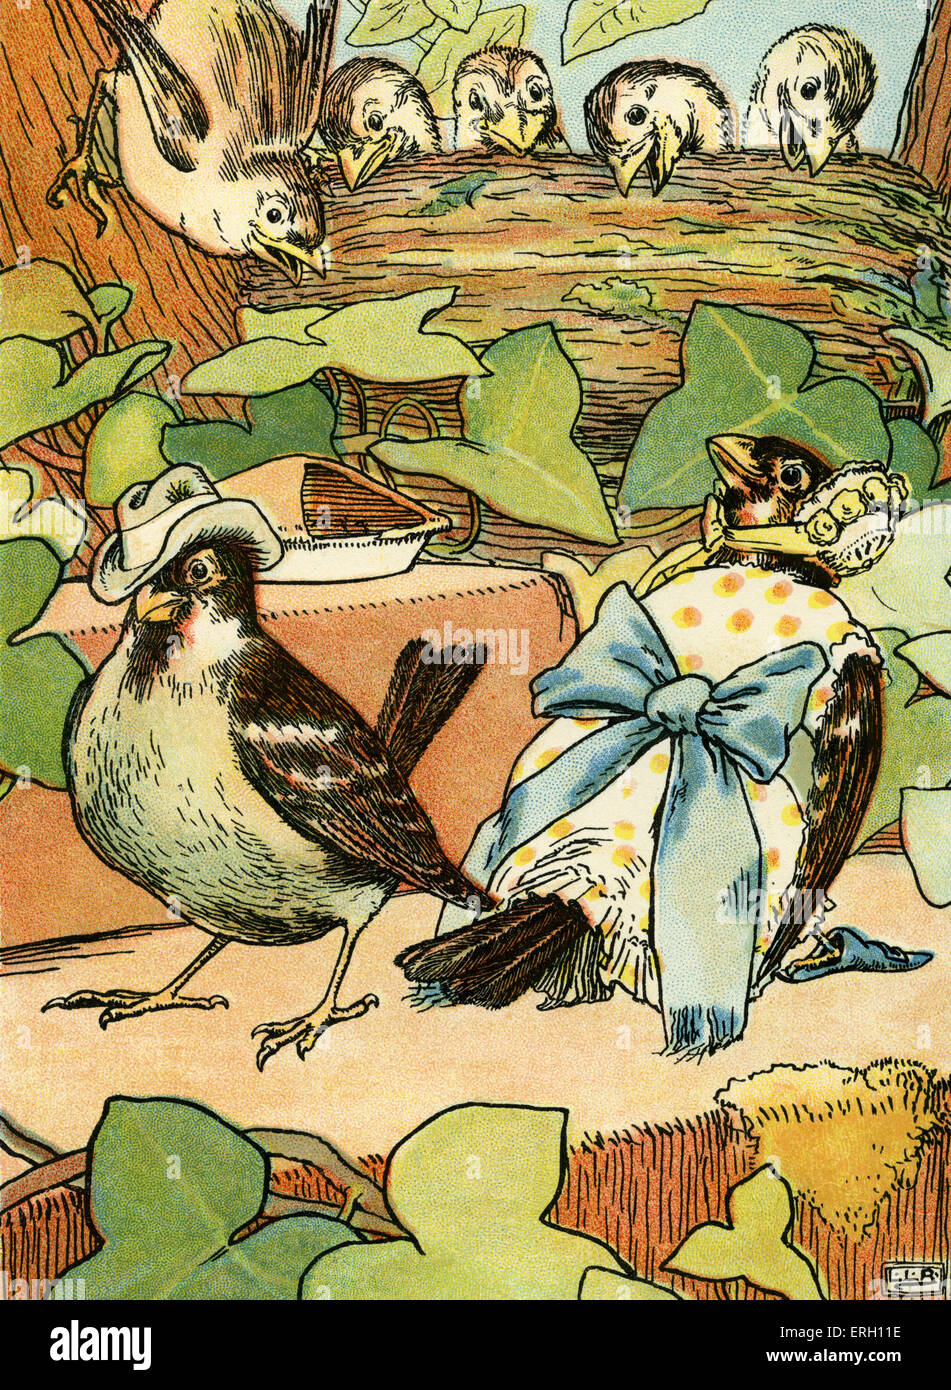 Edward Lear 's Nonsense Songs. Illustration by L. Leslie Brooke from 'Mr and Mrs Spikky Sparrow': 'Their children cried, O Ma Stock Photo